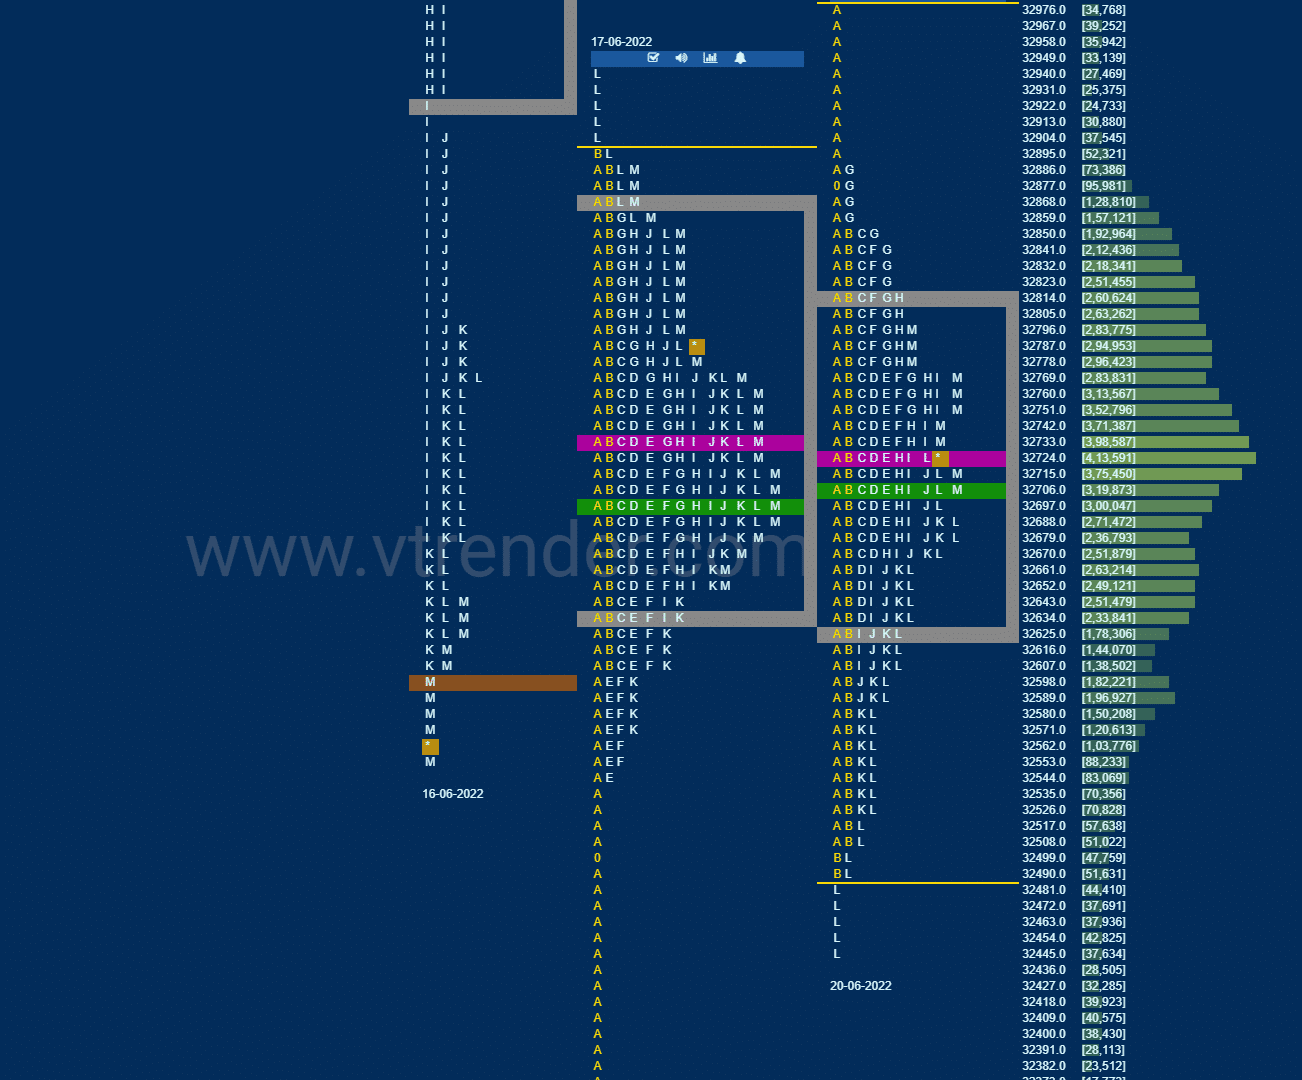 Bnf 14 Market Profile Analysis Dated 20Th Jun 2022 Banknifty Futures, Charts, Day Trading, Intraday Trading, Intraday Trading Strategies, Market Profile, Market Profile Trading Strategies, Nifty Futures, Order Flow Analysis, Support And Resistance, Technical Analysis, Trading Strategies, Volume Profile Trading